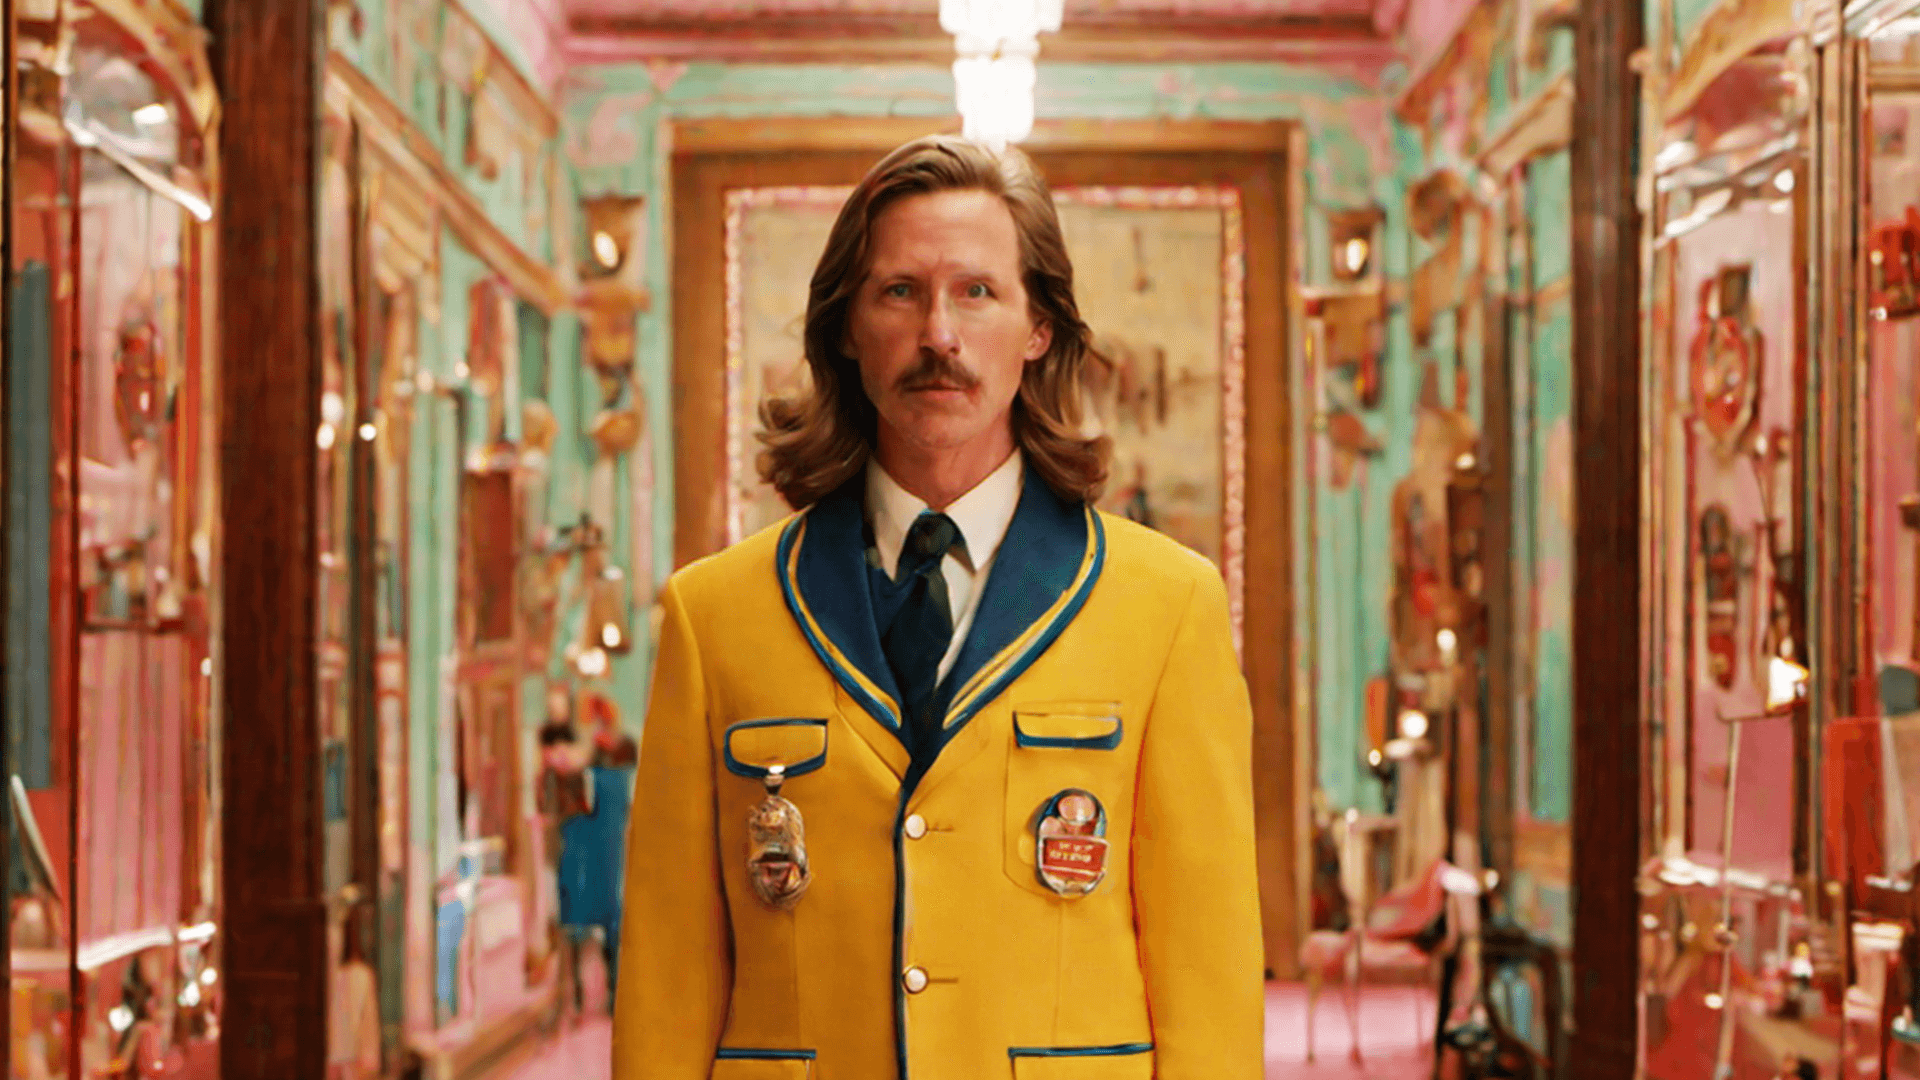 Wes anderson color palette, font, and style